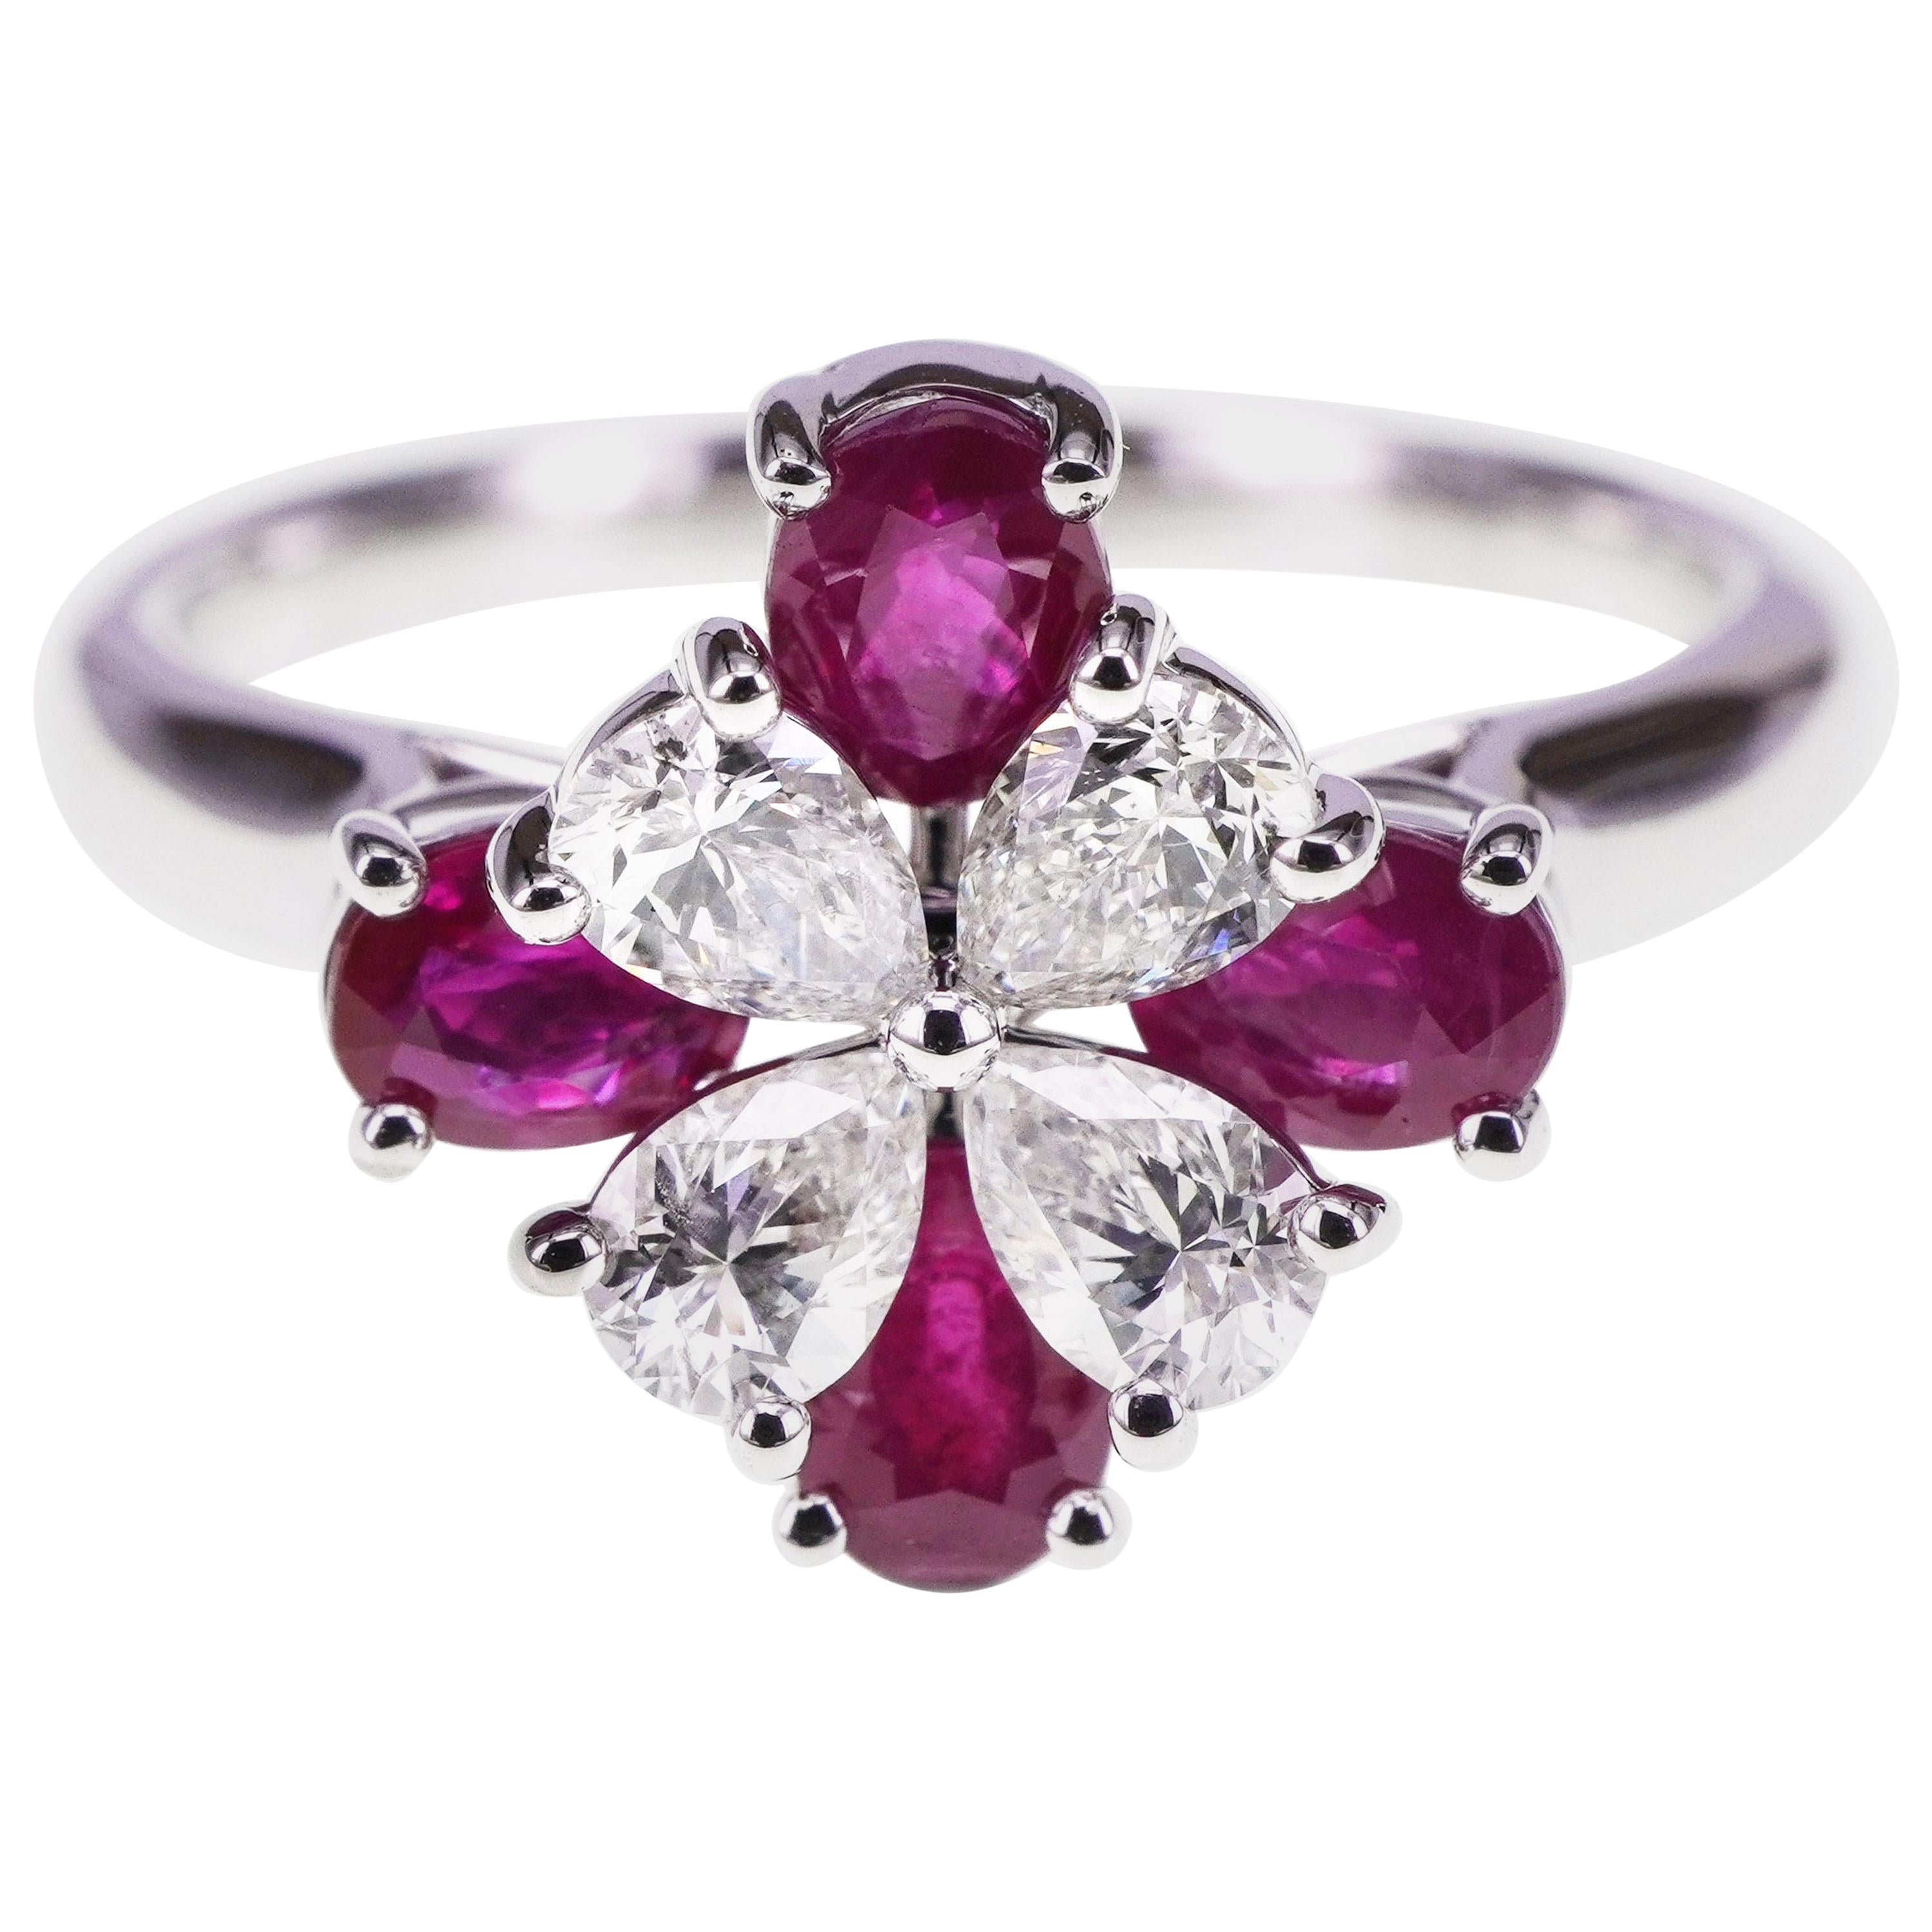 1.02 Carat Marquis Diamond and Ruby Ring For Sale at 1stDibs